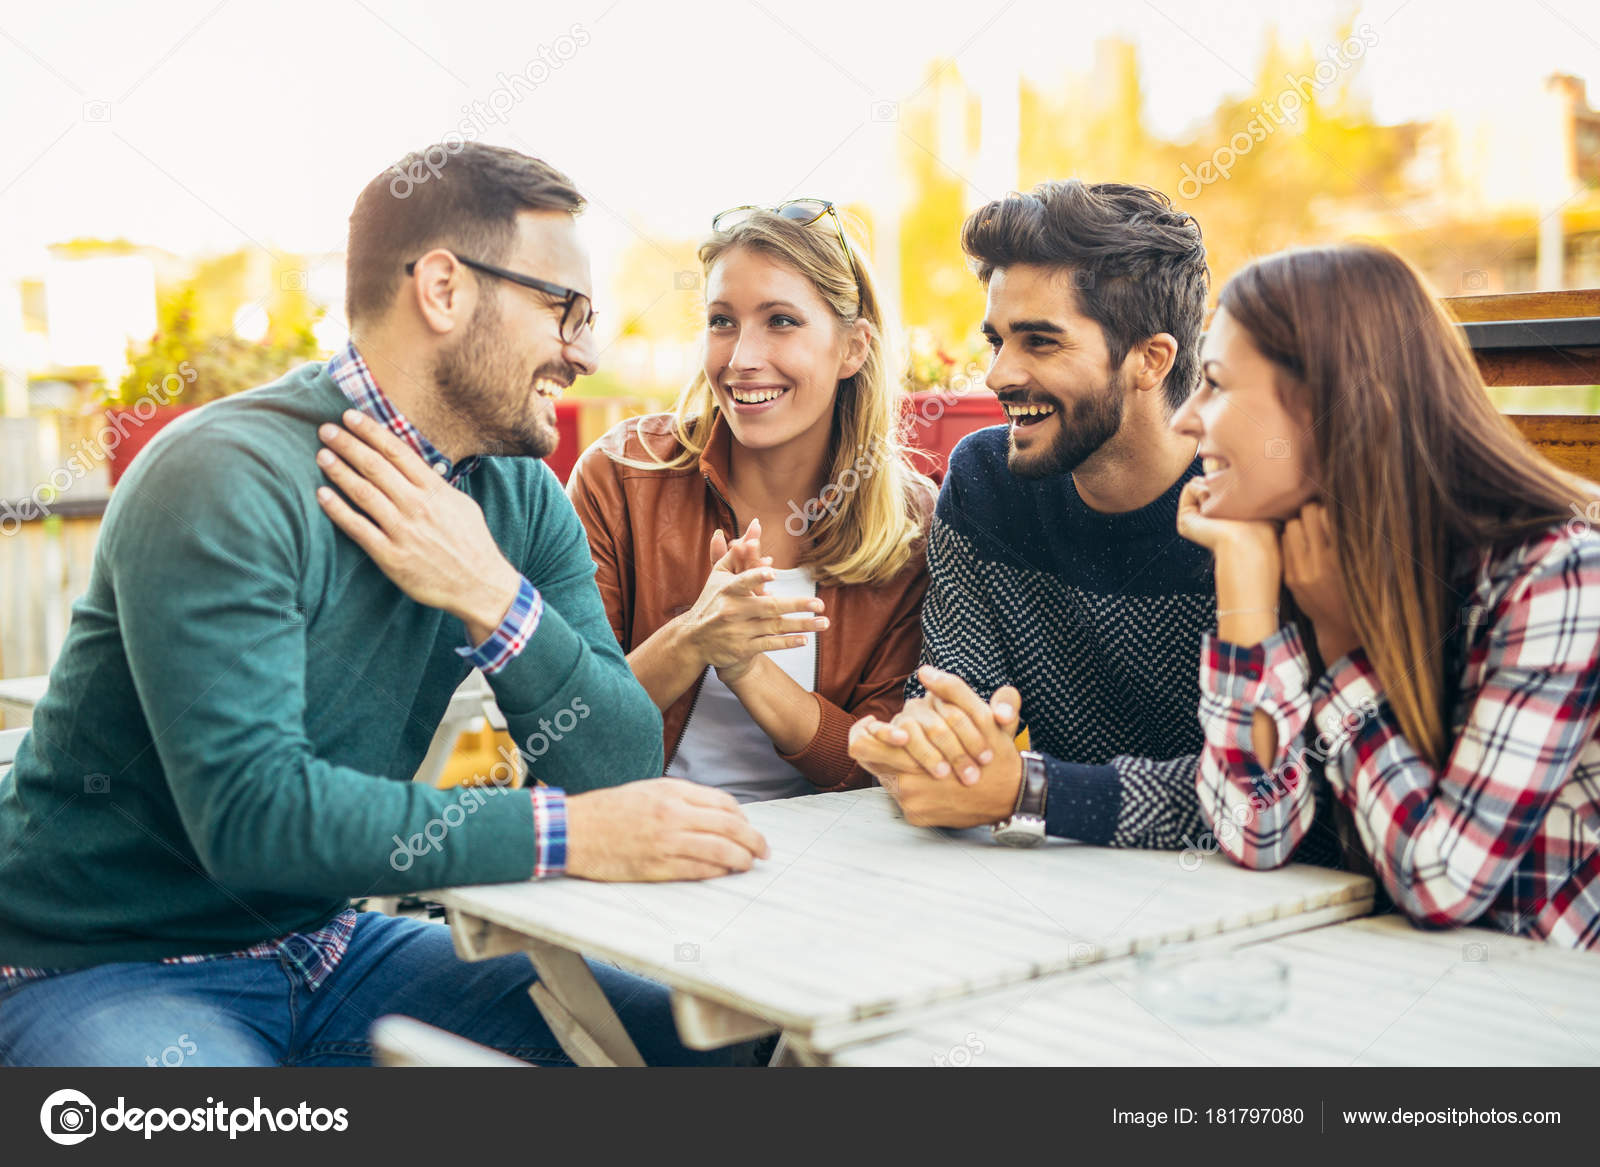 Four friends Stock Photos, Royalty Free Four friends Images ...